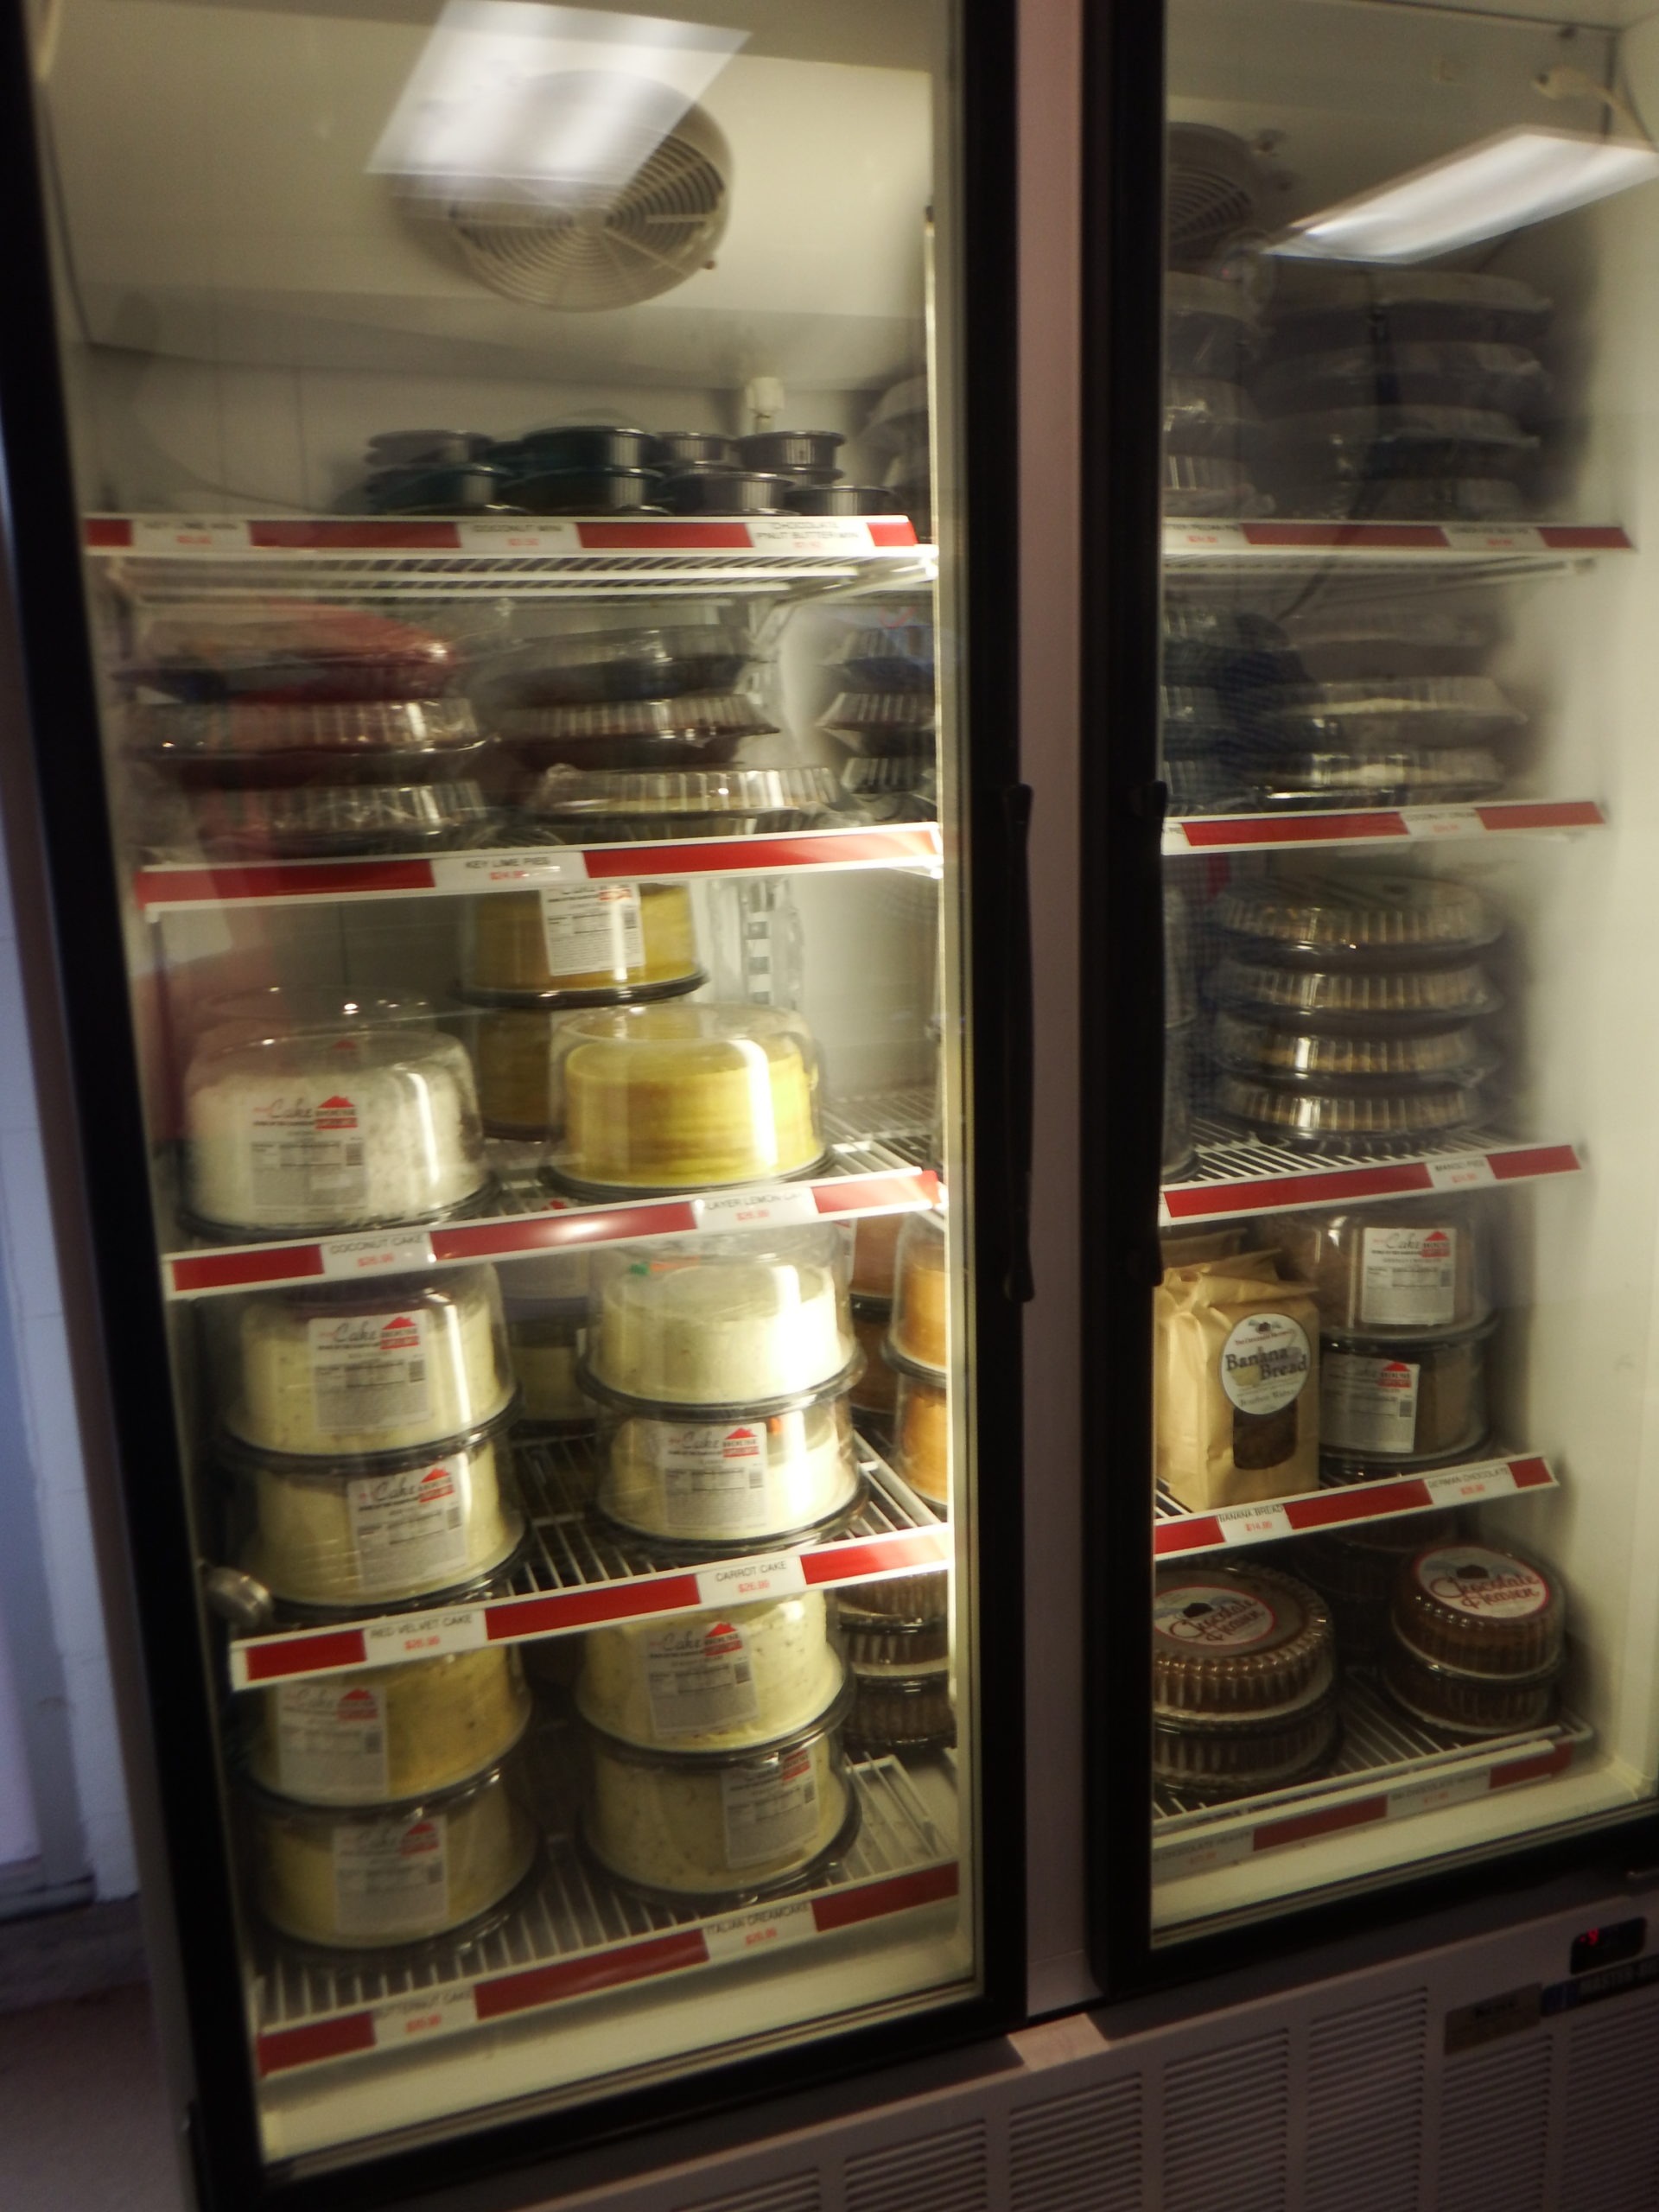 refrigerator with desserts, cheesecakes and pies at Destin Ice